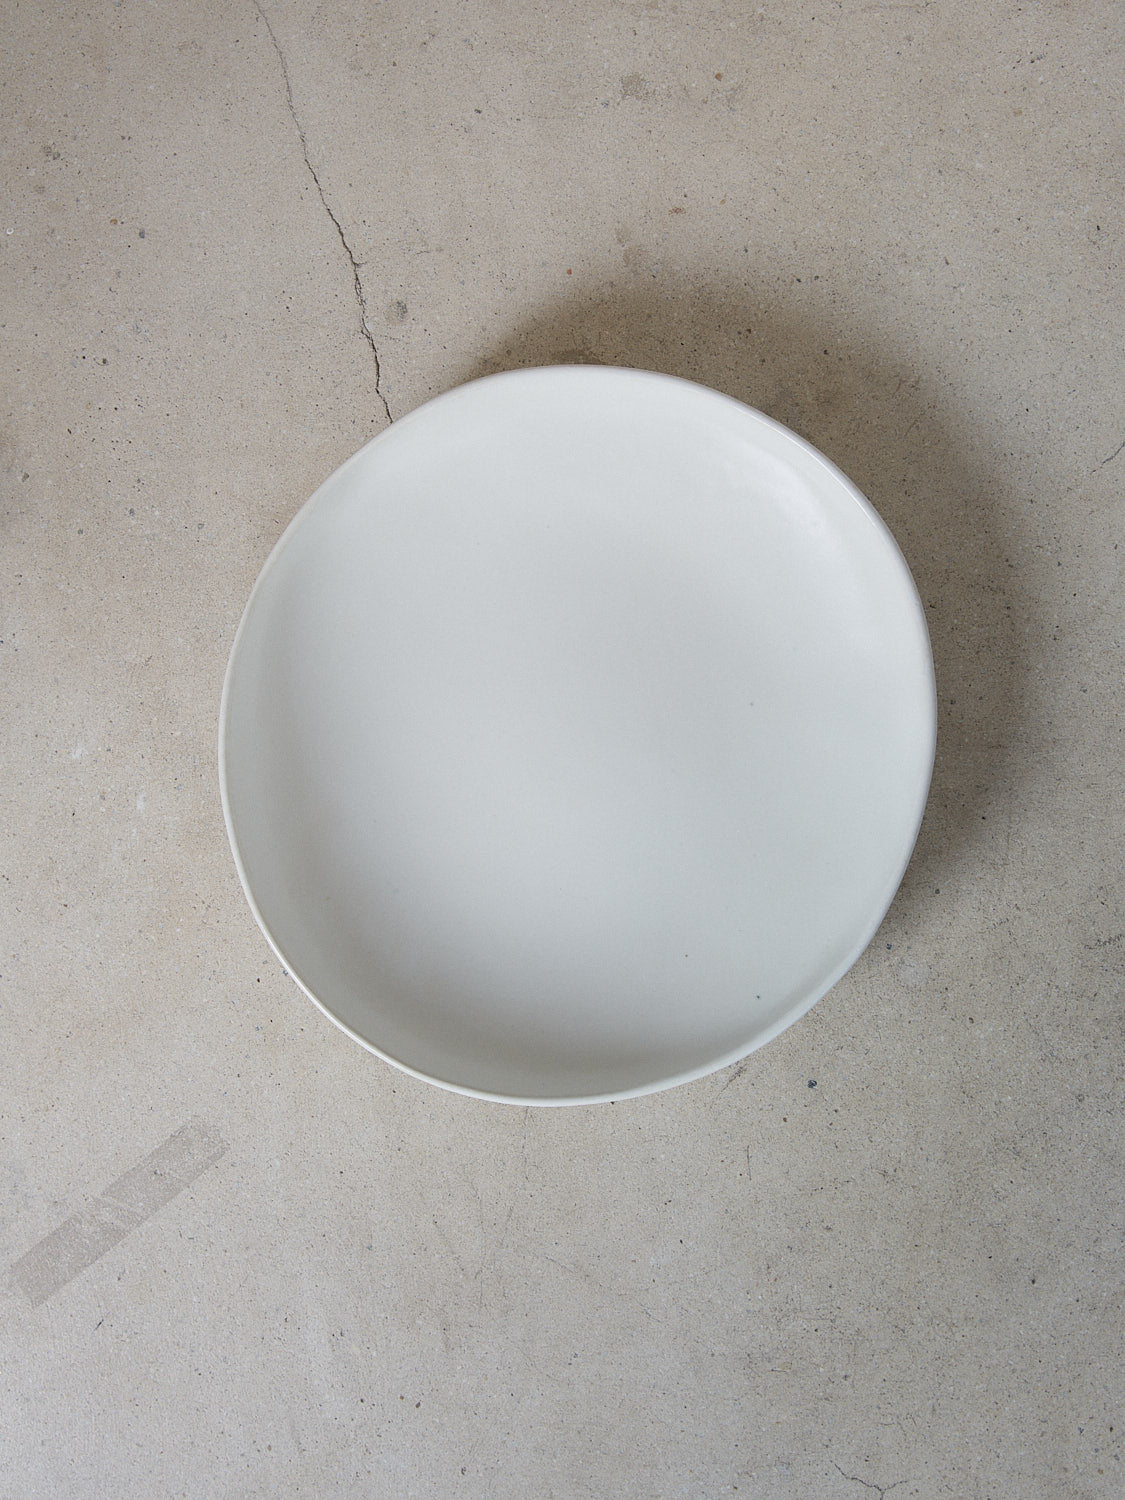 Large Raw Serving Bowl in Ecru. Handmade deep serving bowl perfect for entertaining and everyday use in classic matte white stoneware.